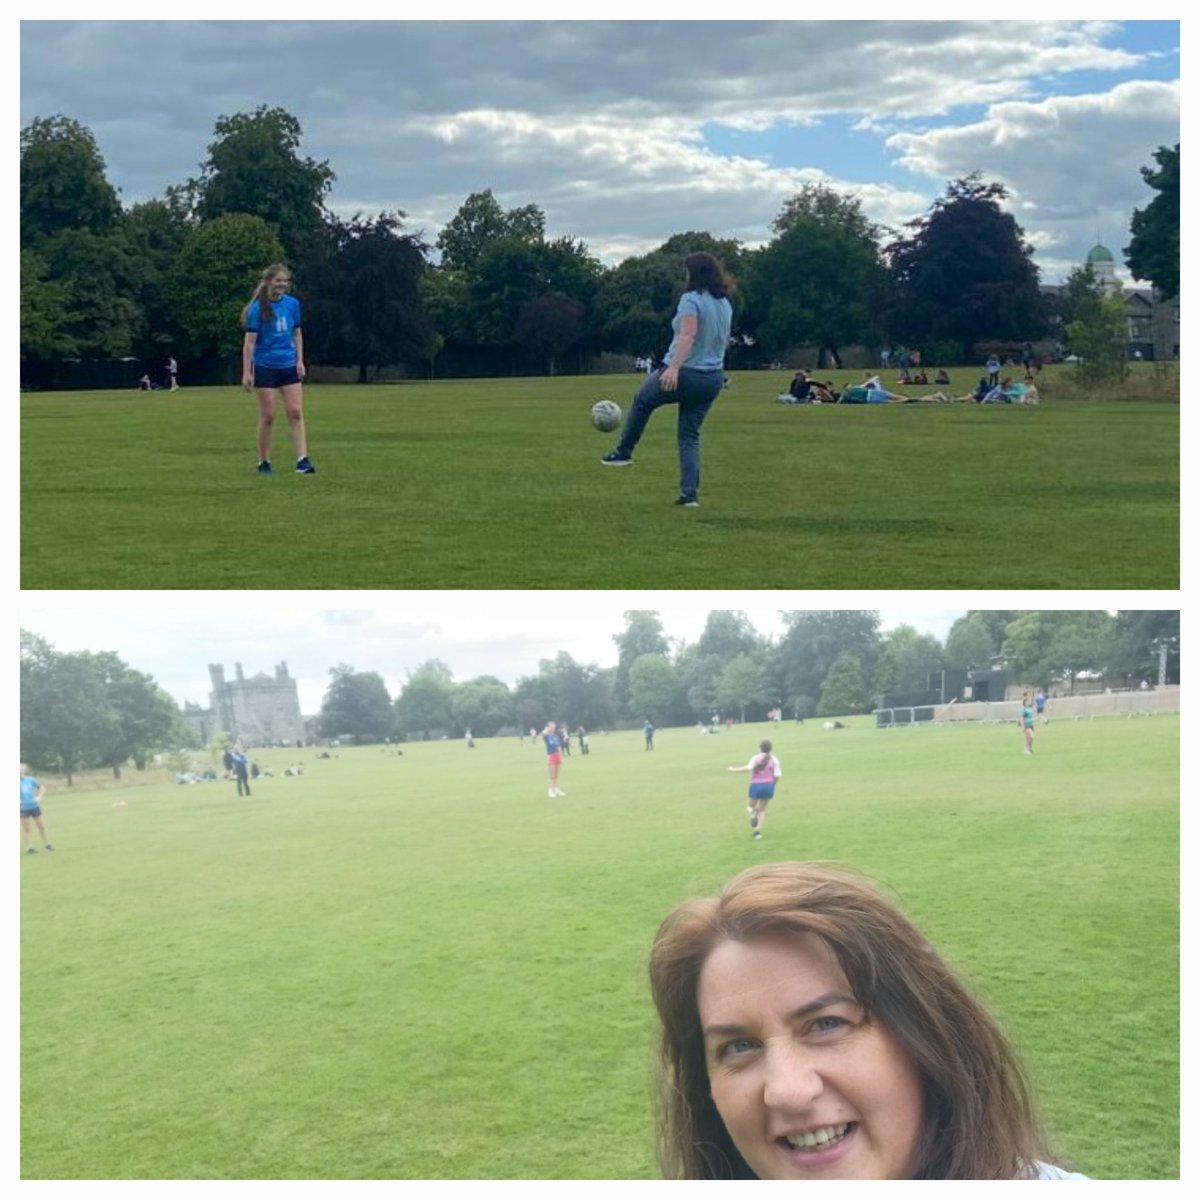 Impromptu game of football with family in the grounds of Kilkenny Castle. I left the hurling to the experts! #AHPsActive #NIAHPsactive @sbreen71 @AlisonFerris3 @HeatherMcF16 @GeraldineTeagu5 @FarrellEamon